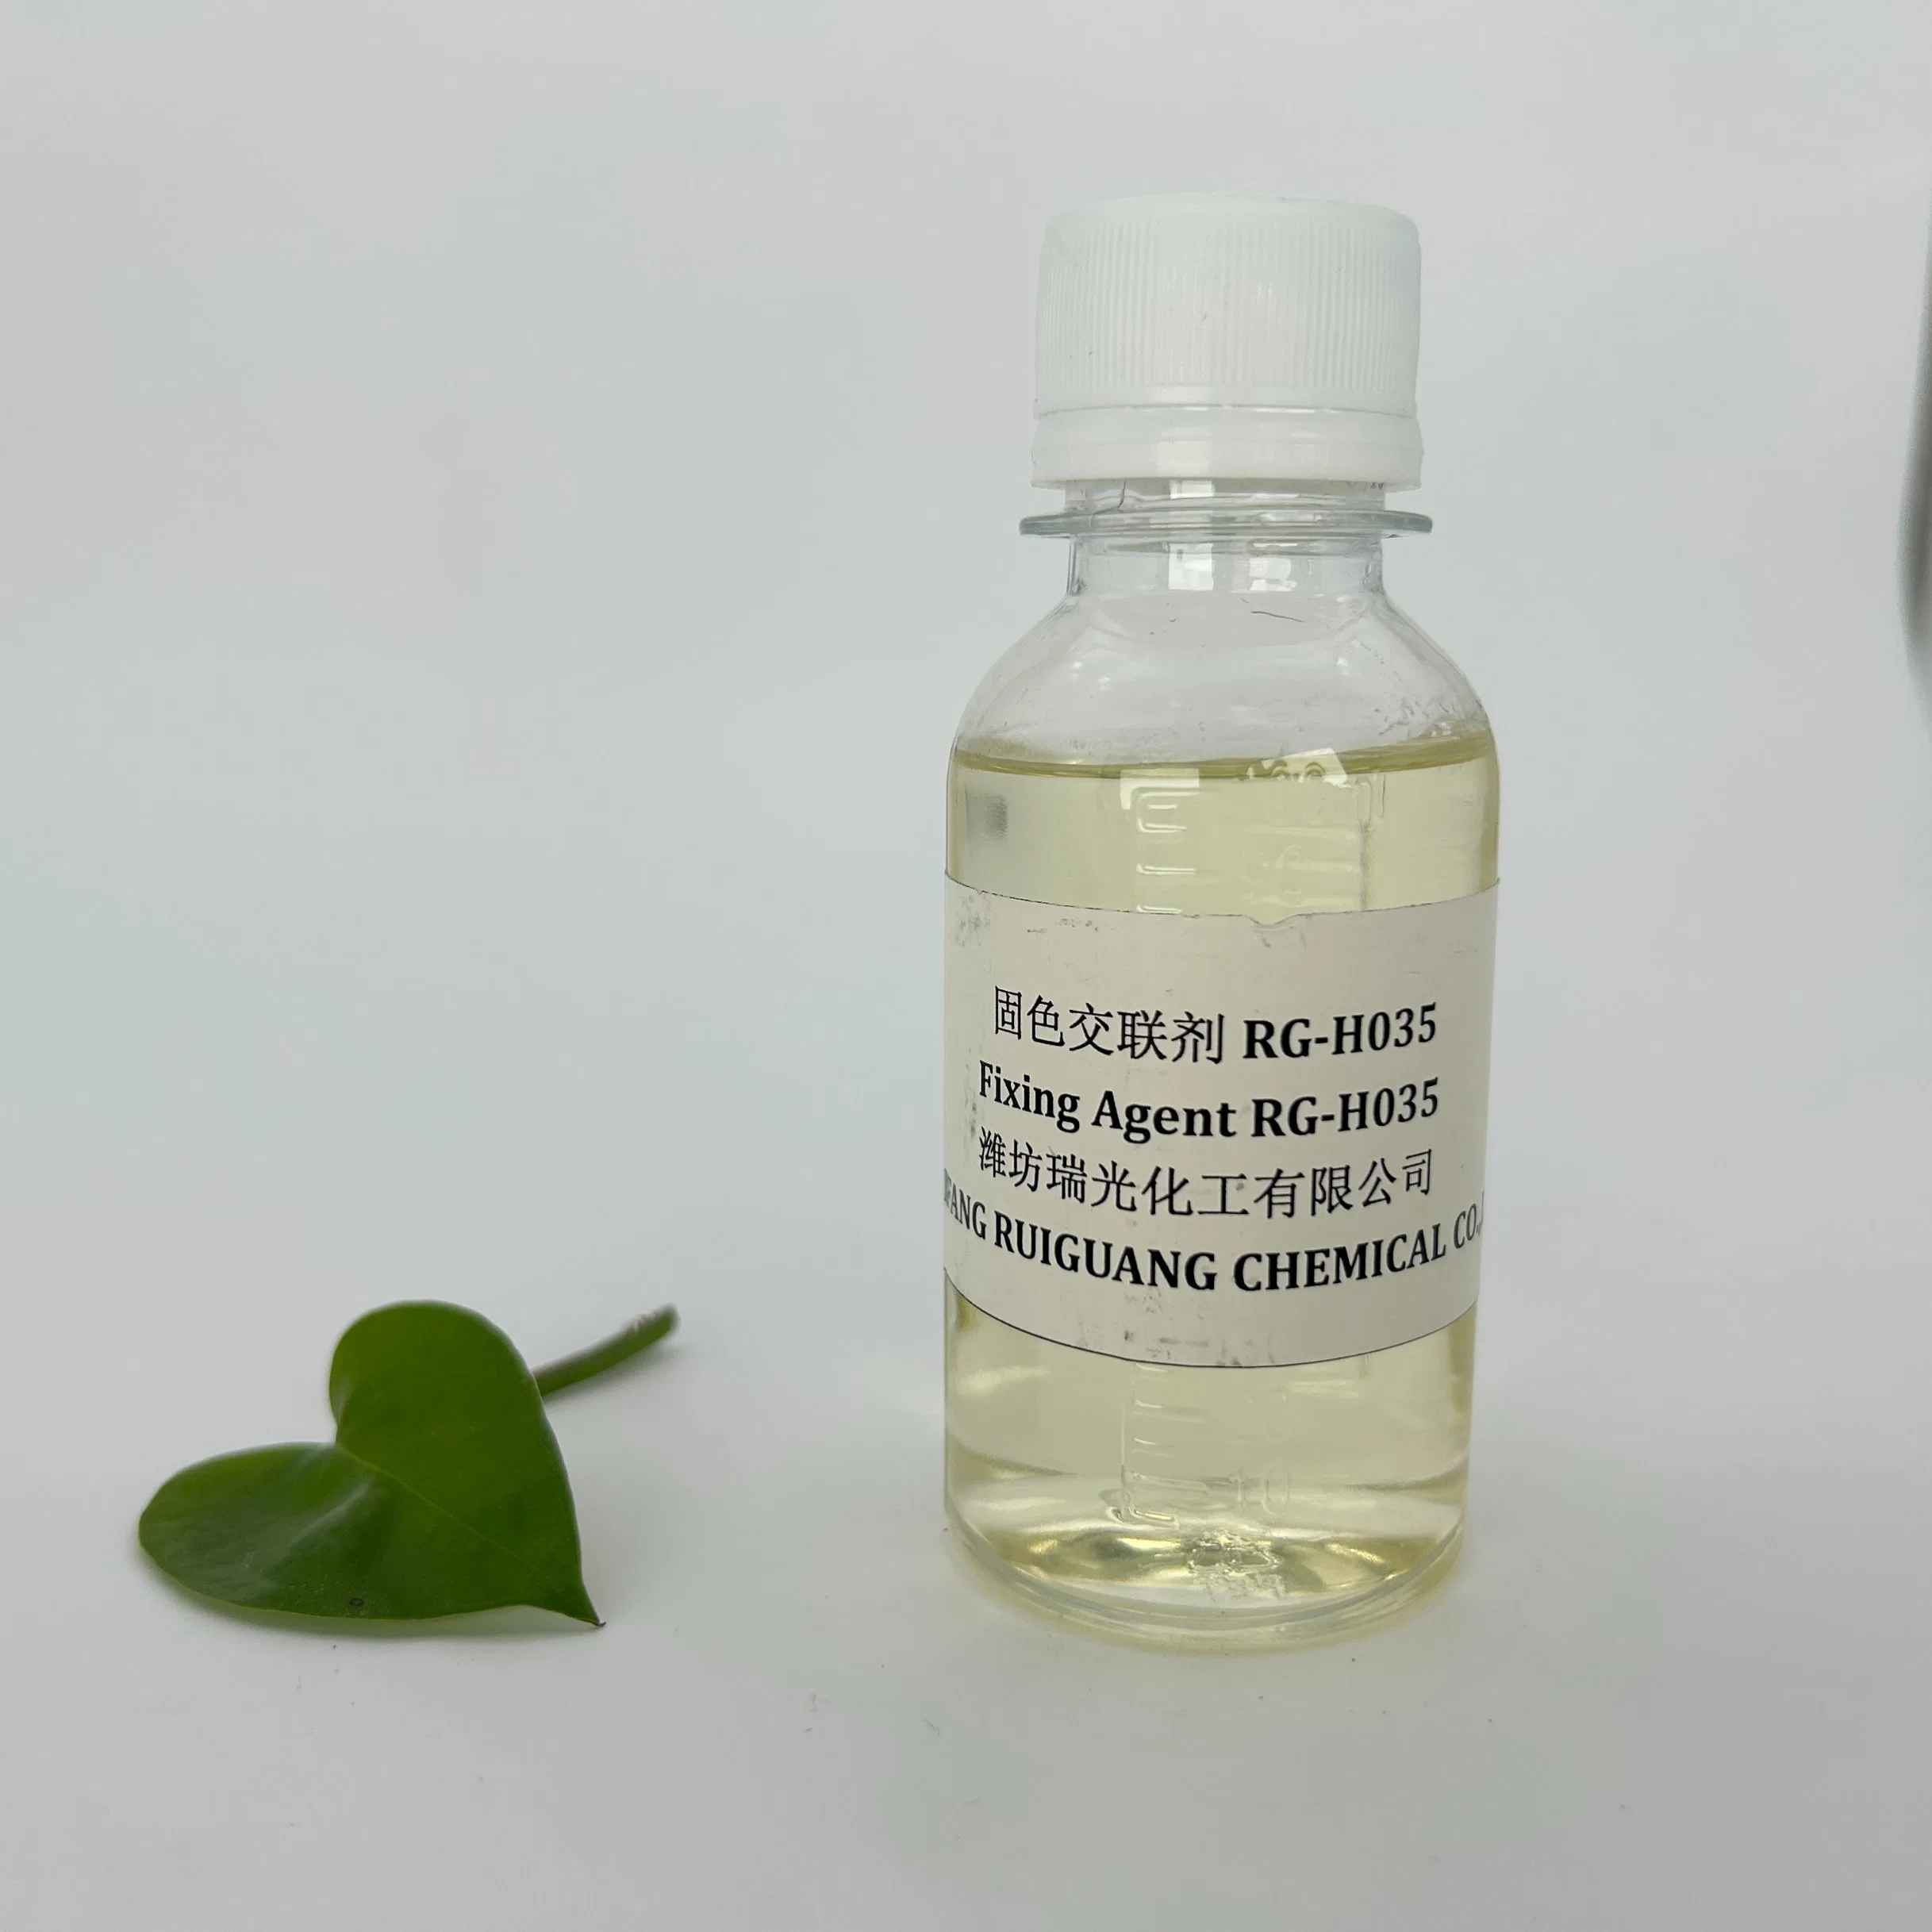 Textile Auxiliary Dyeing and Printing Cross-Linking Formaldehyde-Free Fixer/Fixing Agent Rg-H035 for Polyester Cotton Blend Fabric Finishing Agent